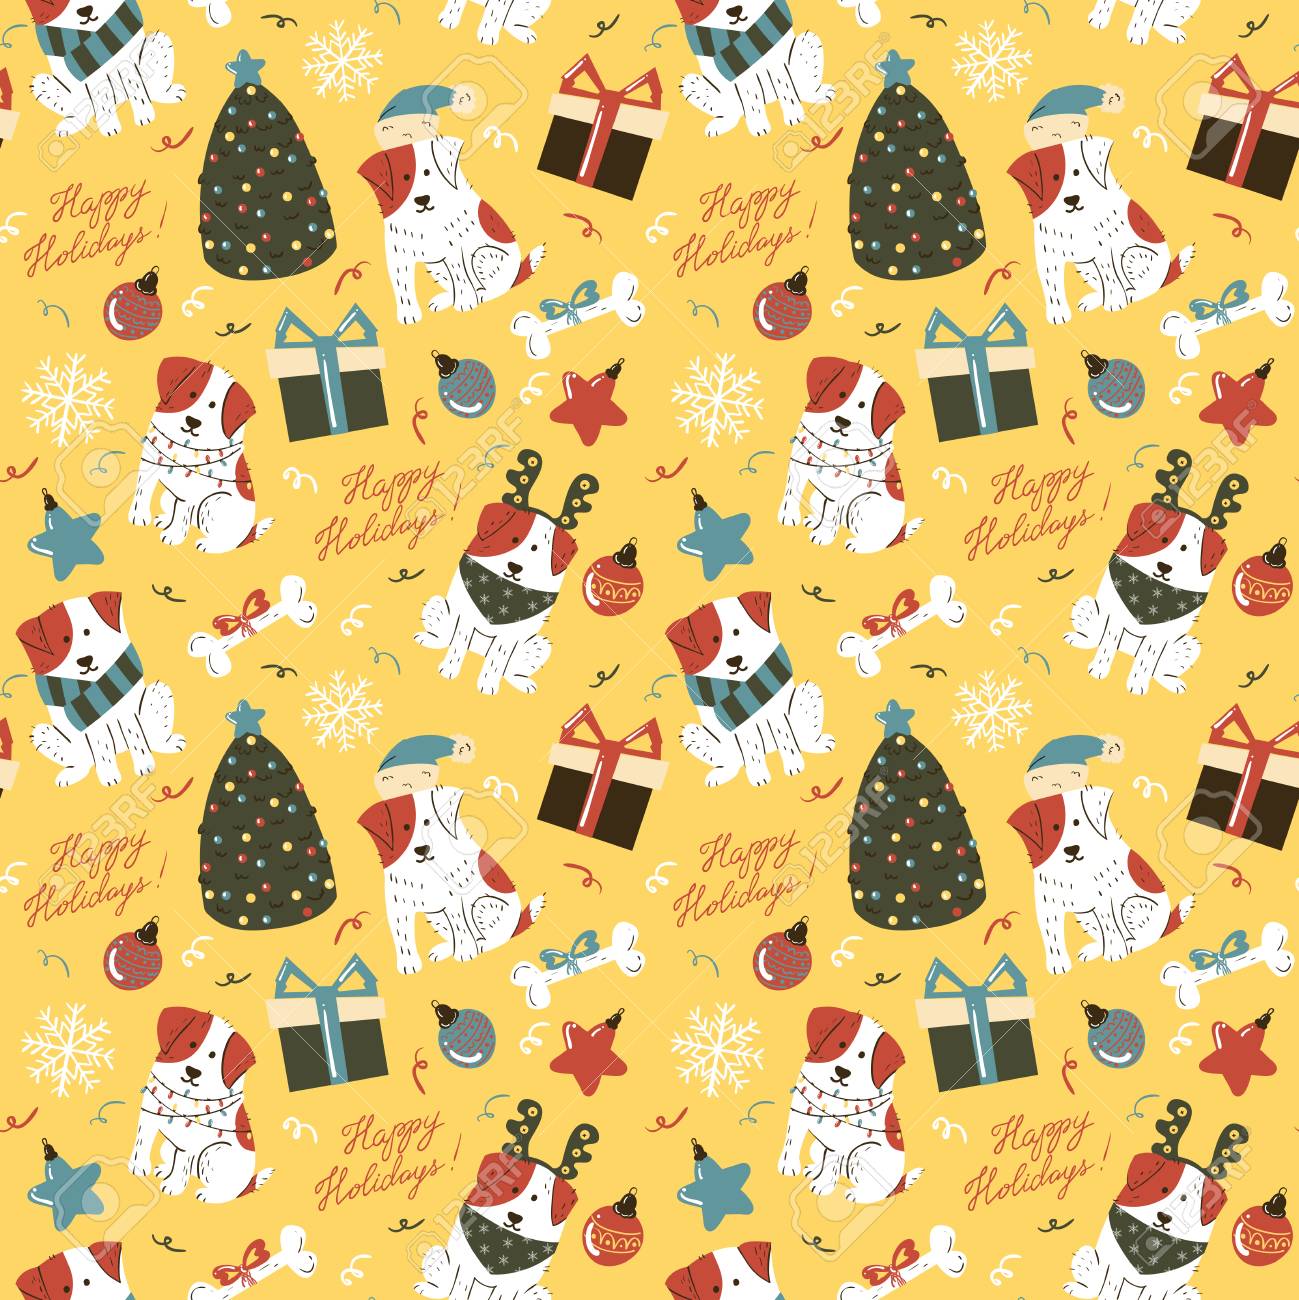 Christmas Cute White Dogs With Brown Spots Seamless Pattern Funny